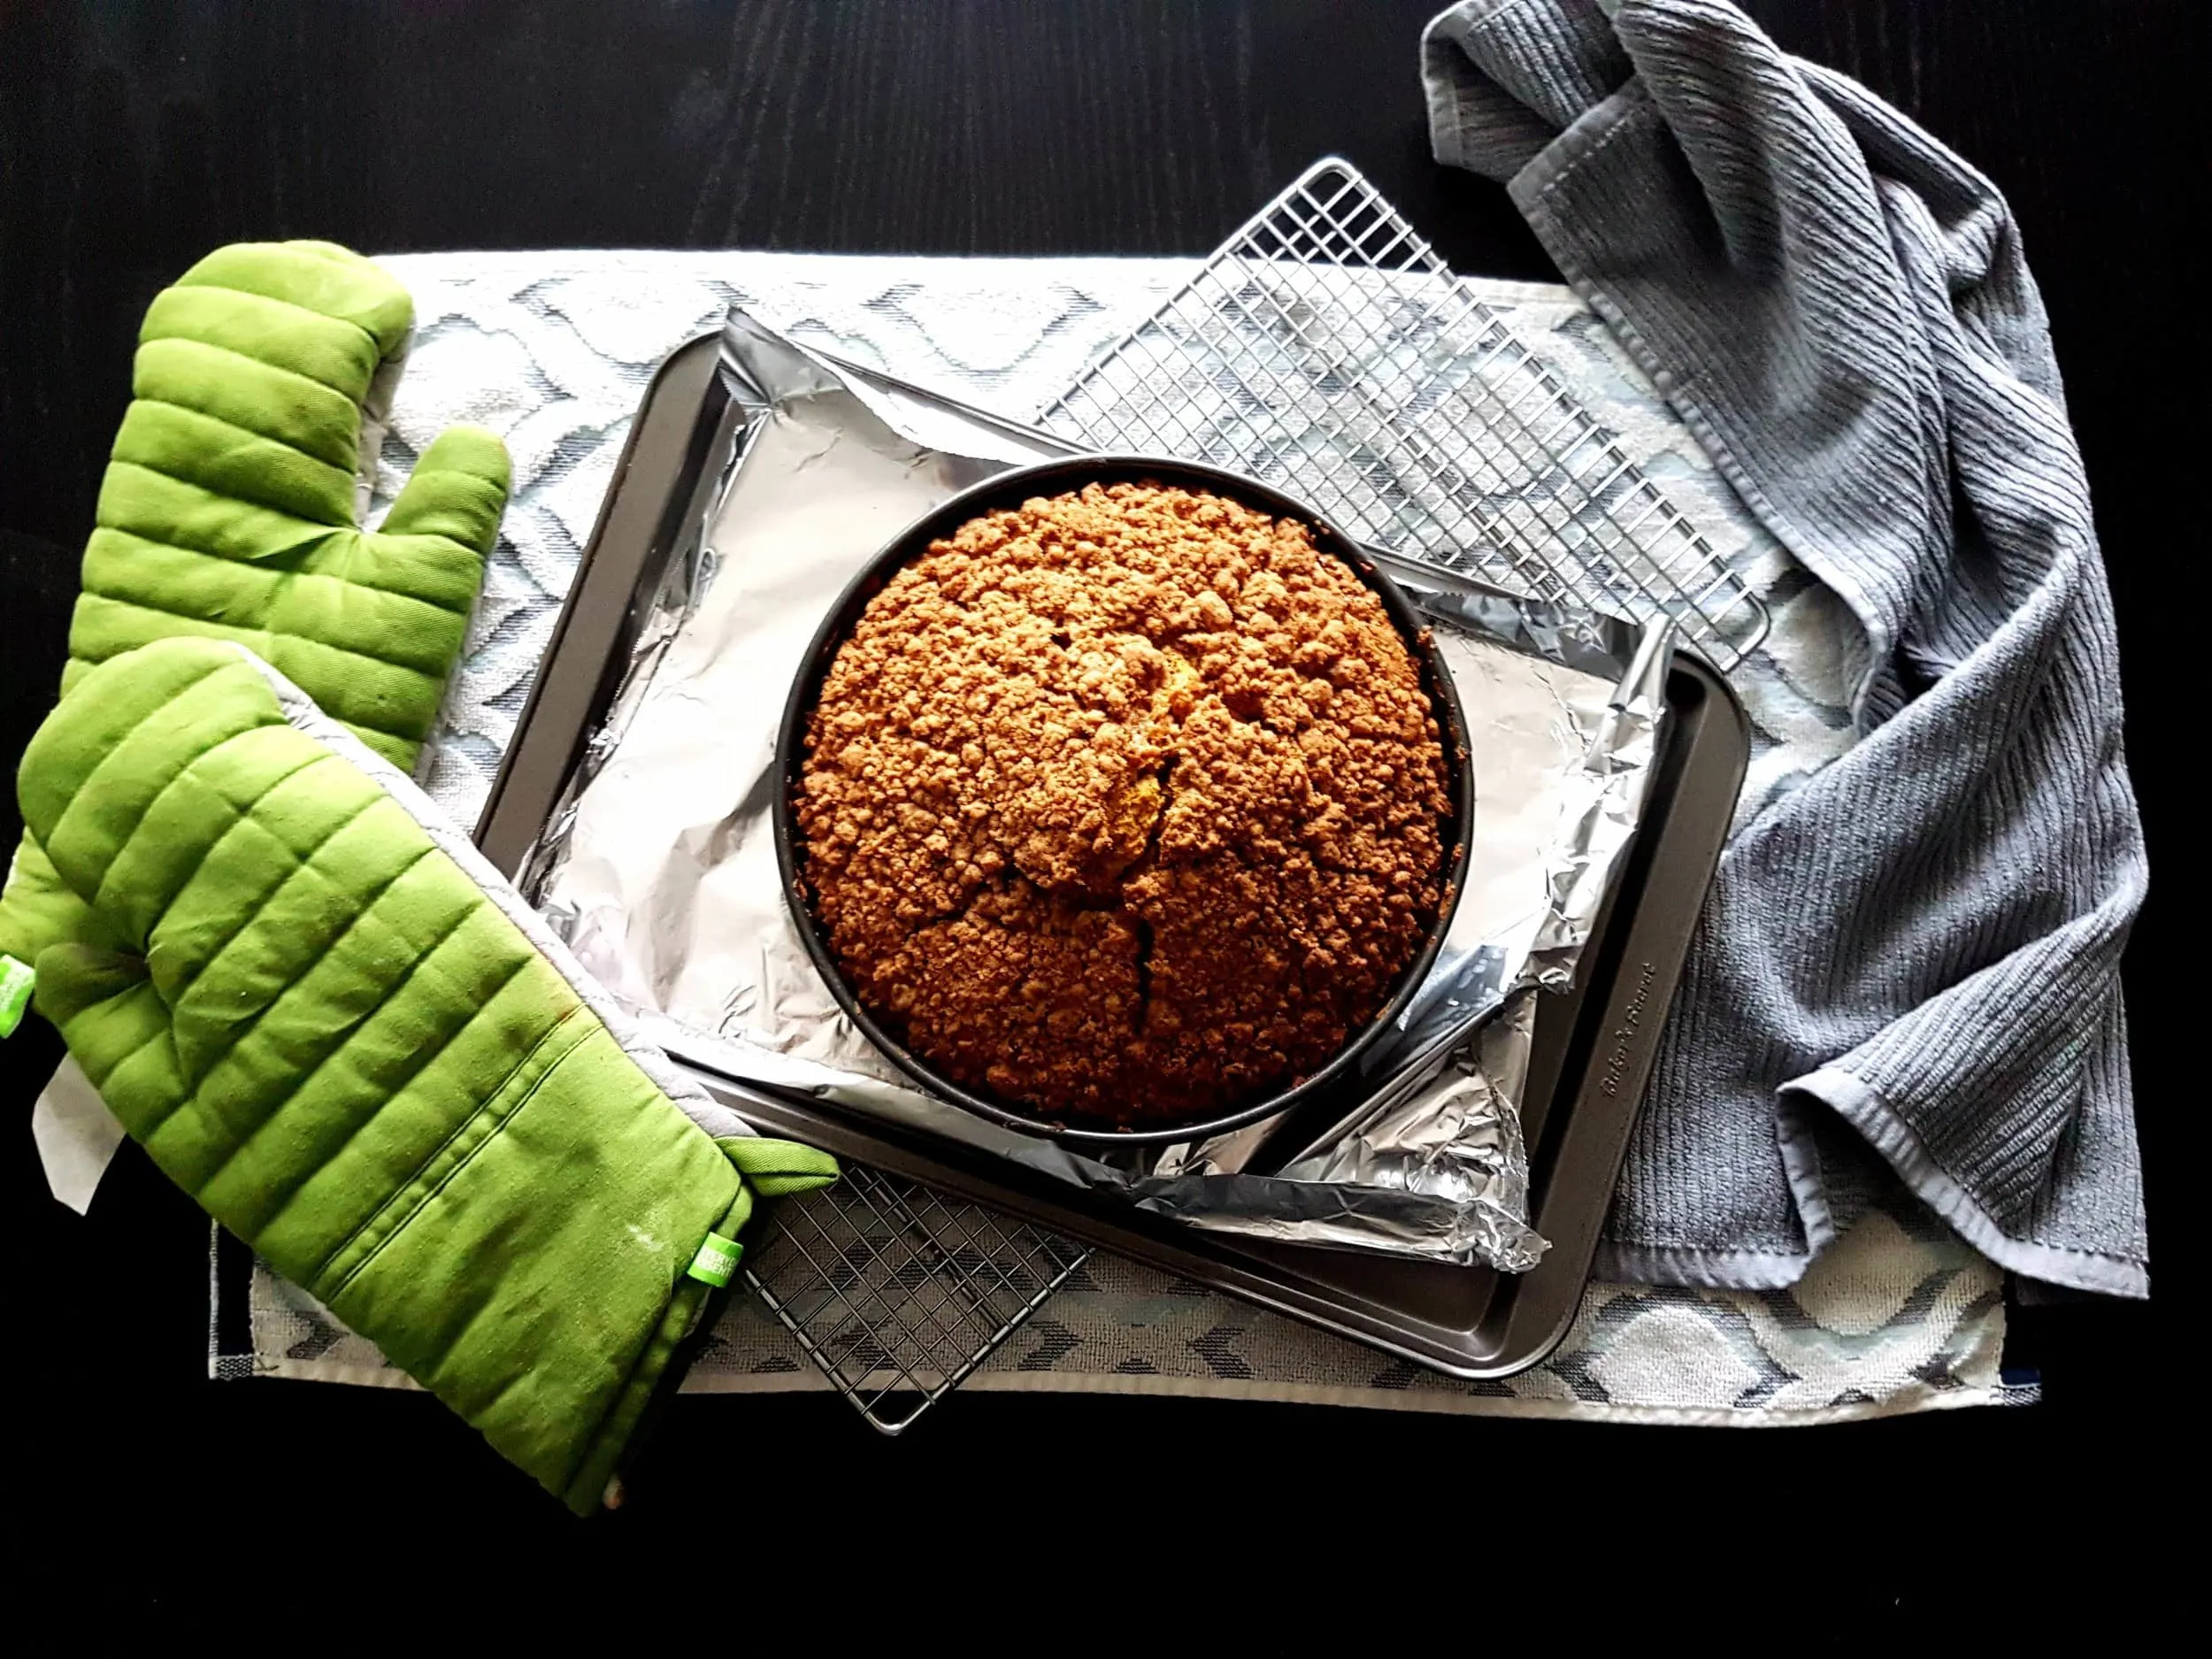 Pumpkin Sour Cream Coffee Cake hot from the oven.